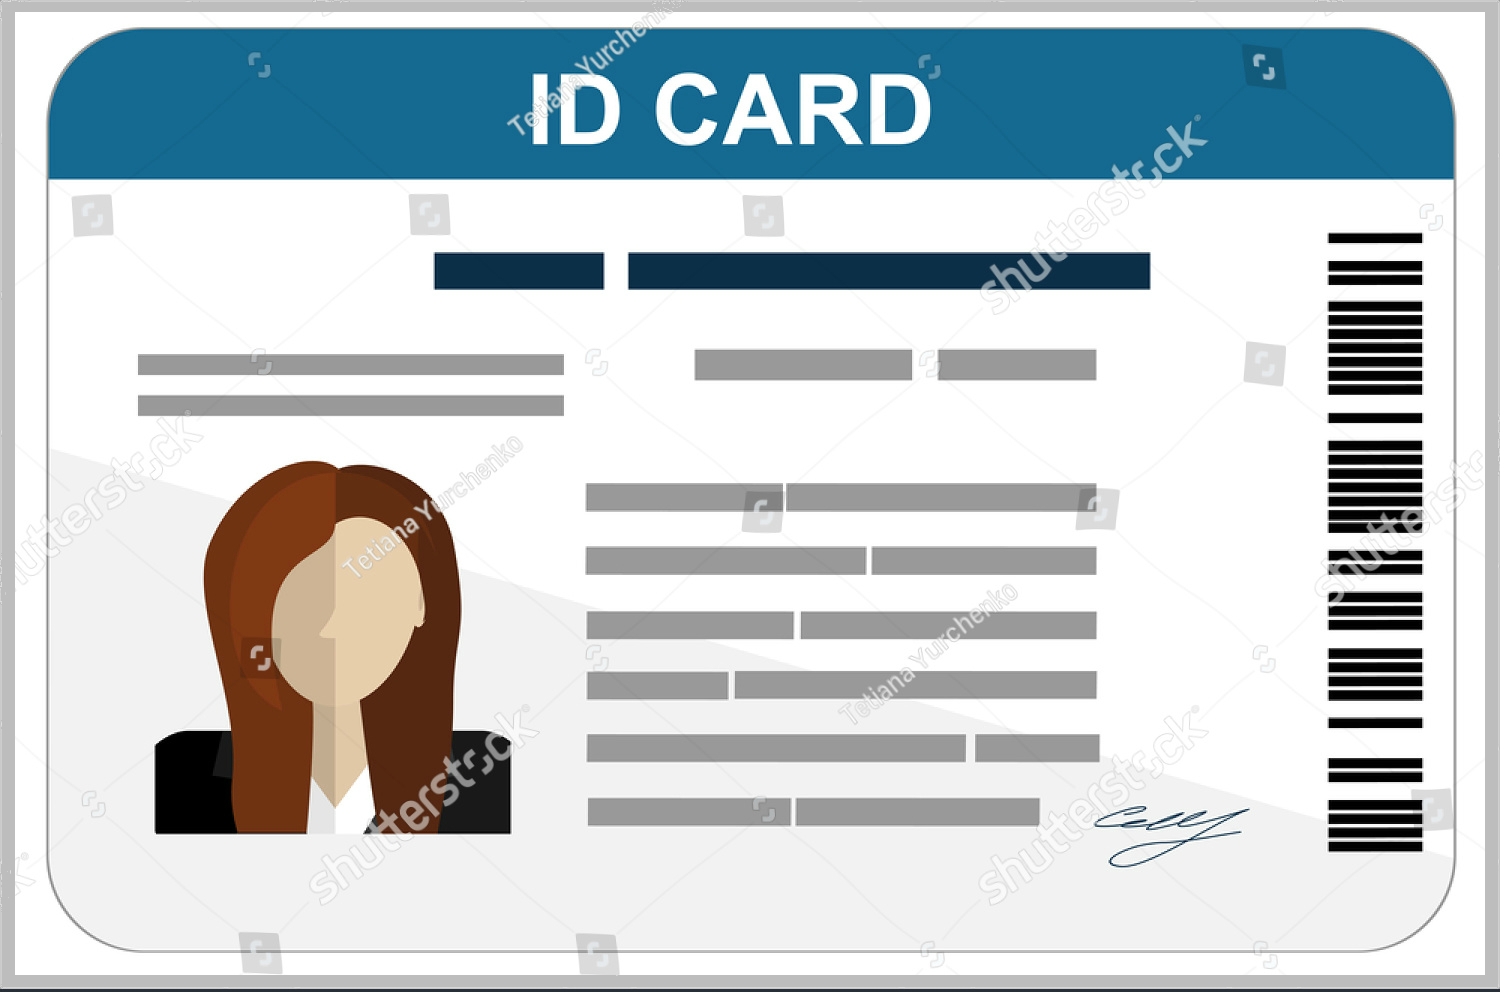 4E4820 Id Card Template Photoshop | Wiring Library Throughout Social Security Card Template Photoshop